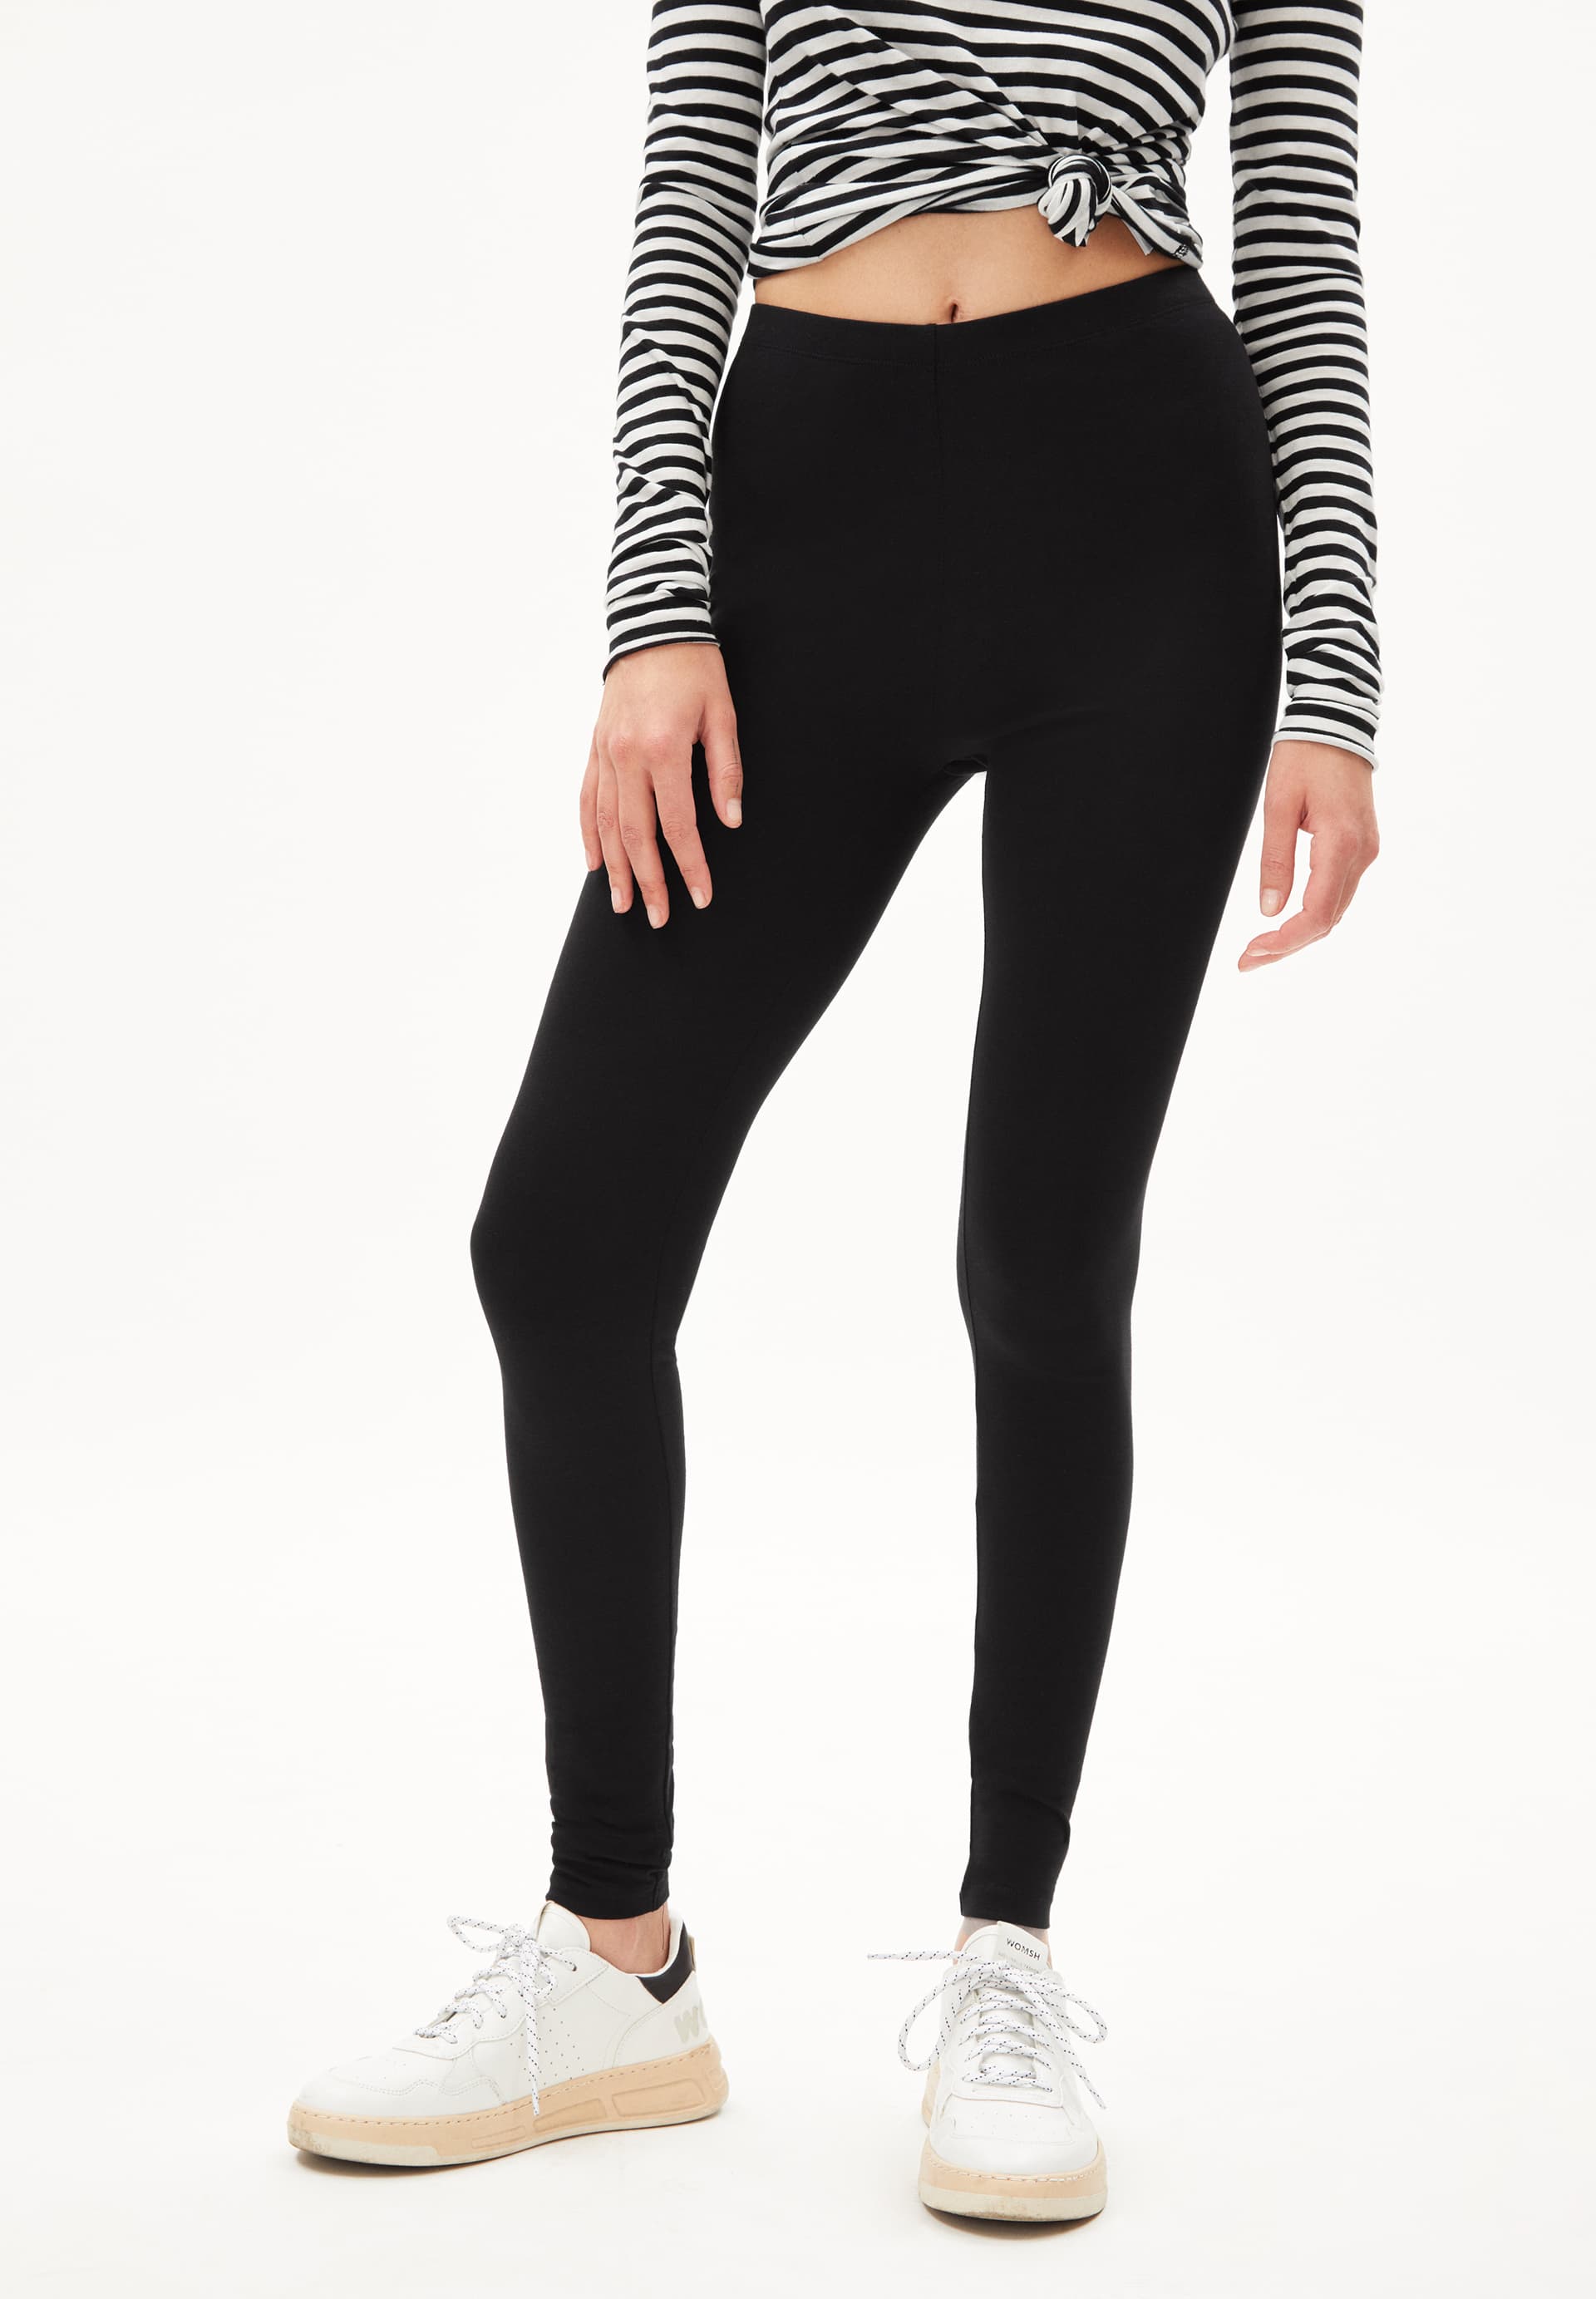 Leggings, More sustainable Fashion for Women